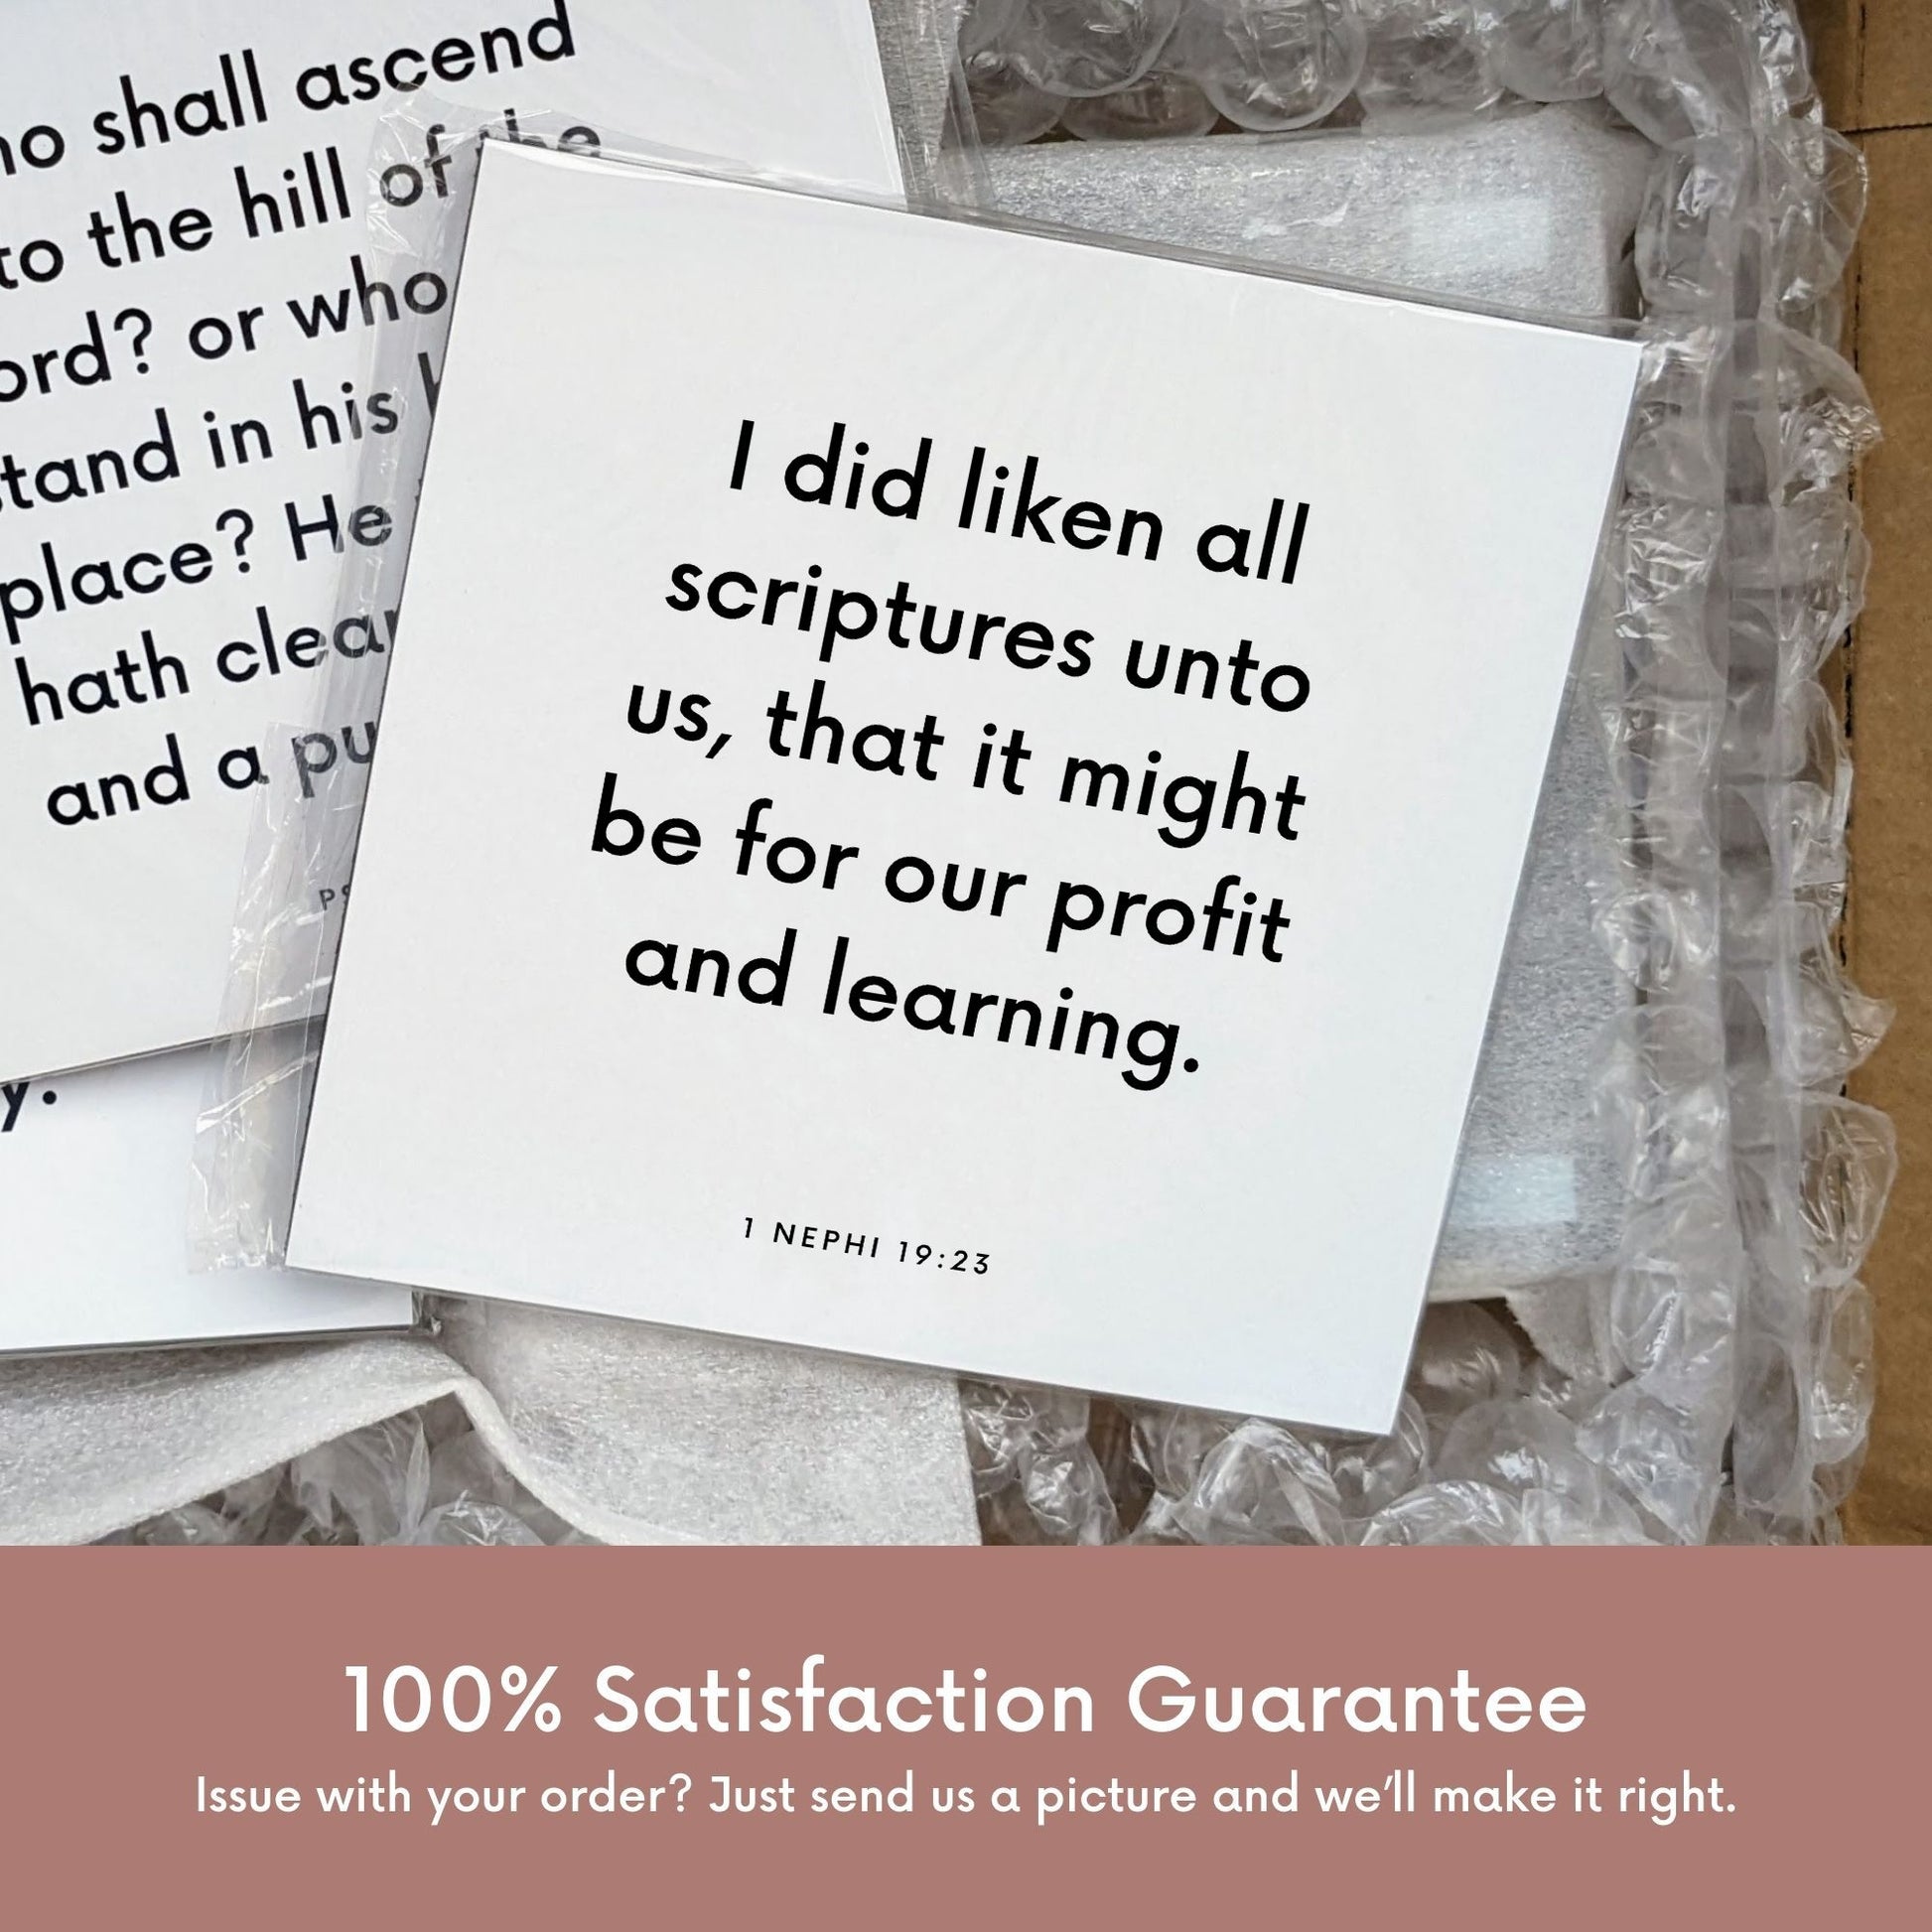 Shipping materials for scripture tile of 1 Nephi 19:23 - "I did liken all scriptures unto us"